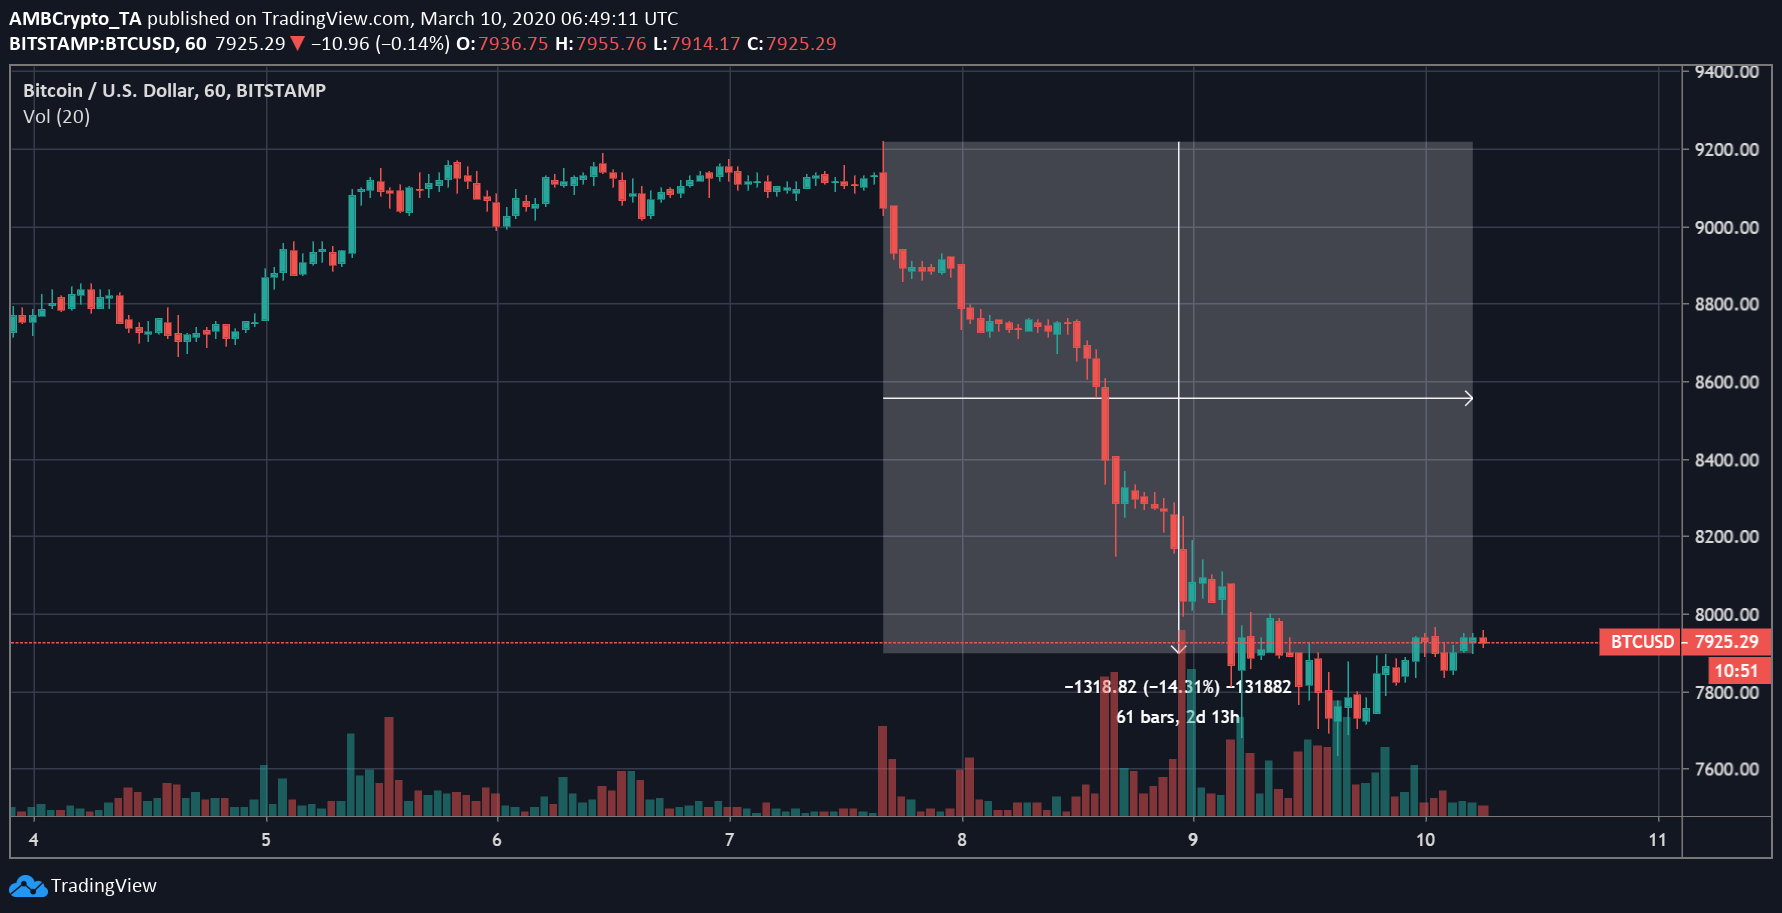 Source: BTC/USD on Trading View